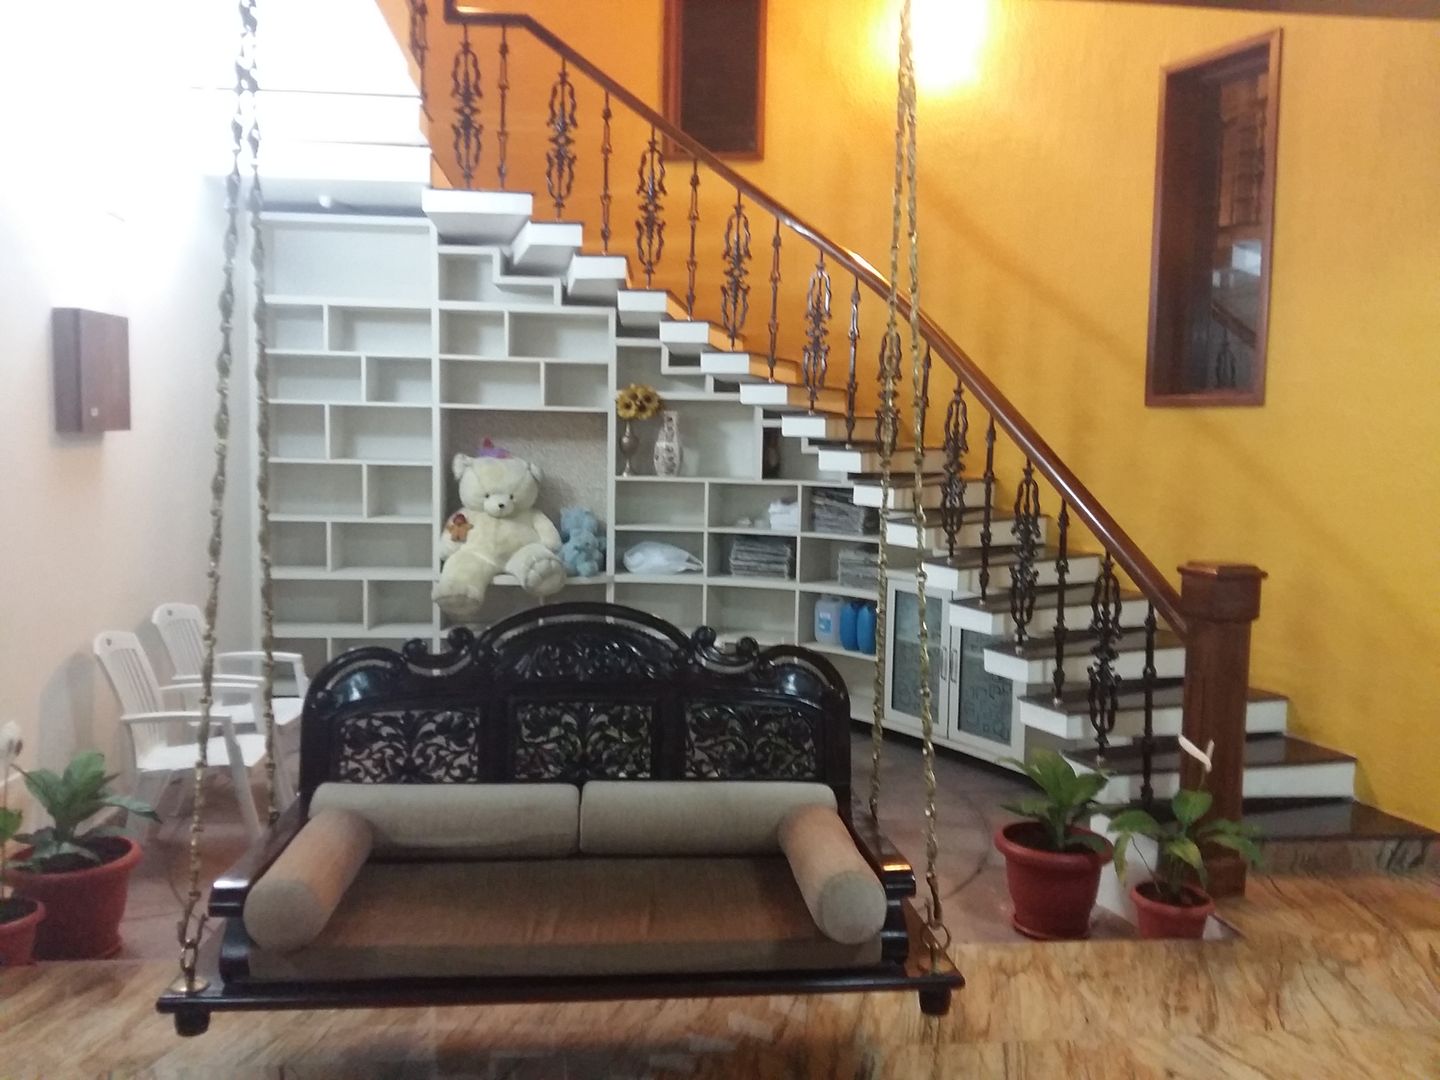 ANUGRAHA - RESIDENCE FOR MR.MUKUND, One Brick At A Time One Brick At A Time Stairs Plant,Property,Furniture,Building,Houseplant,Couch,Flowerpot,Picture frame,Wood,Interior design